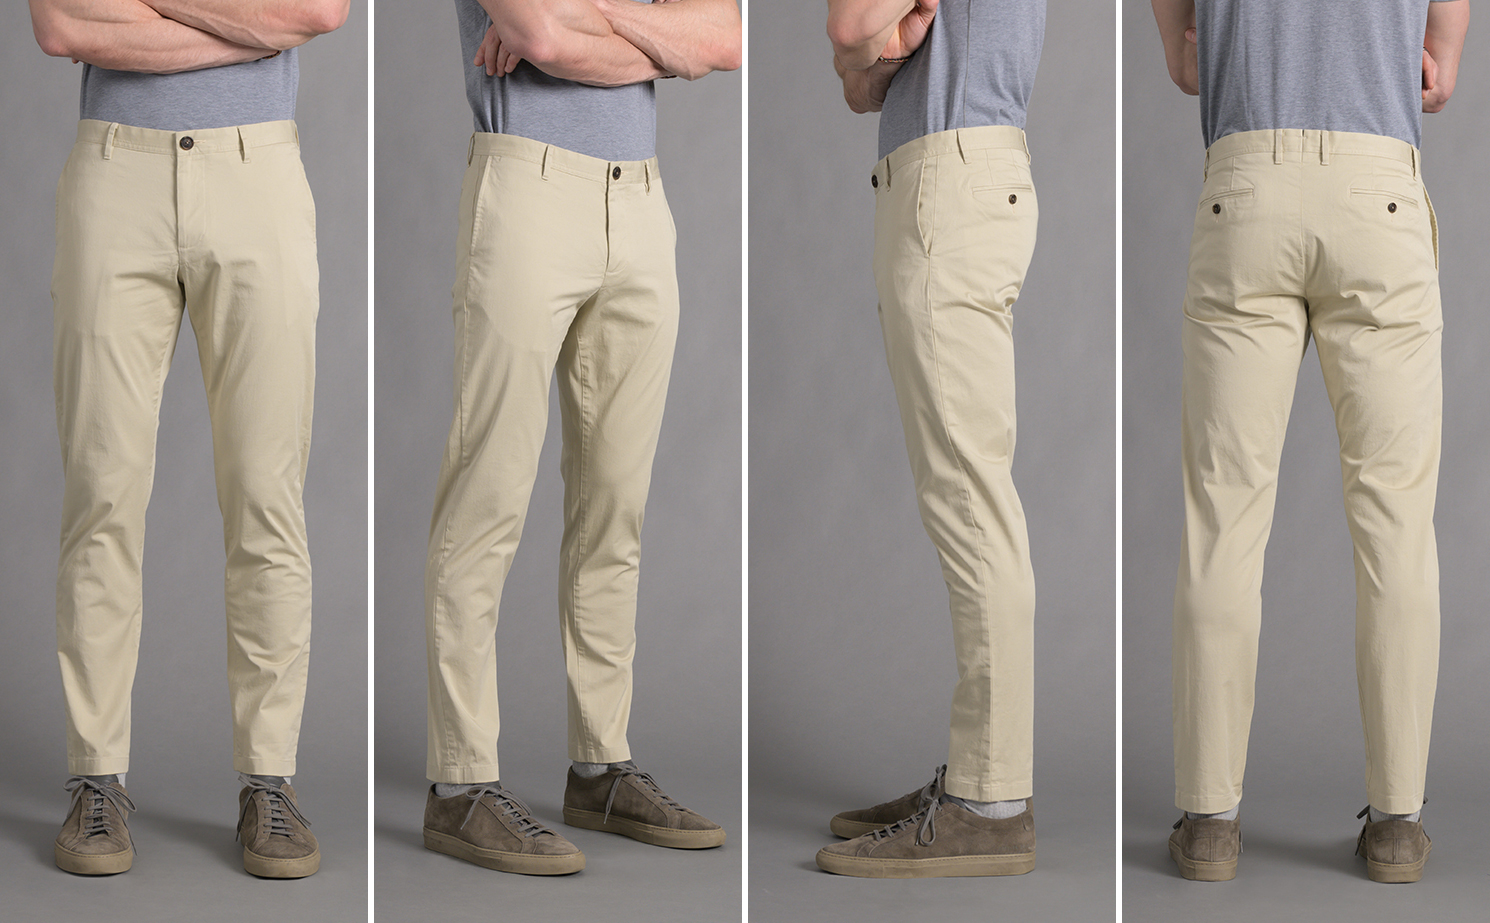 secondary The layout window Proper Cloth Casual Pants: Types of Fit - Proper Cloth Help